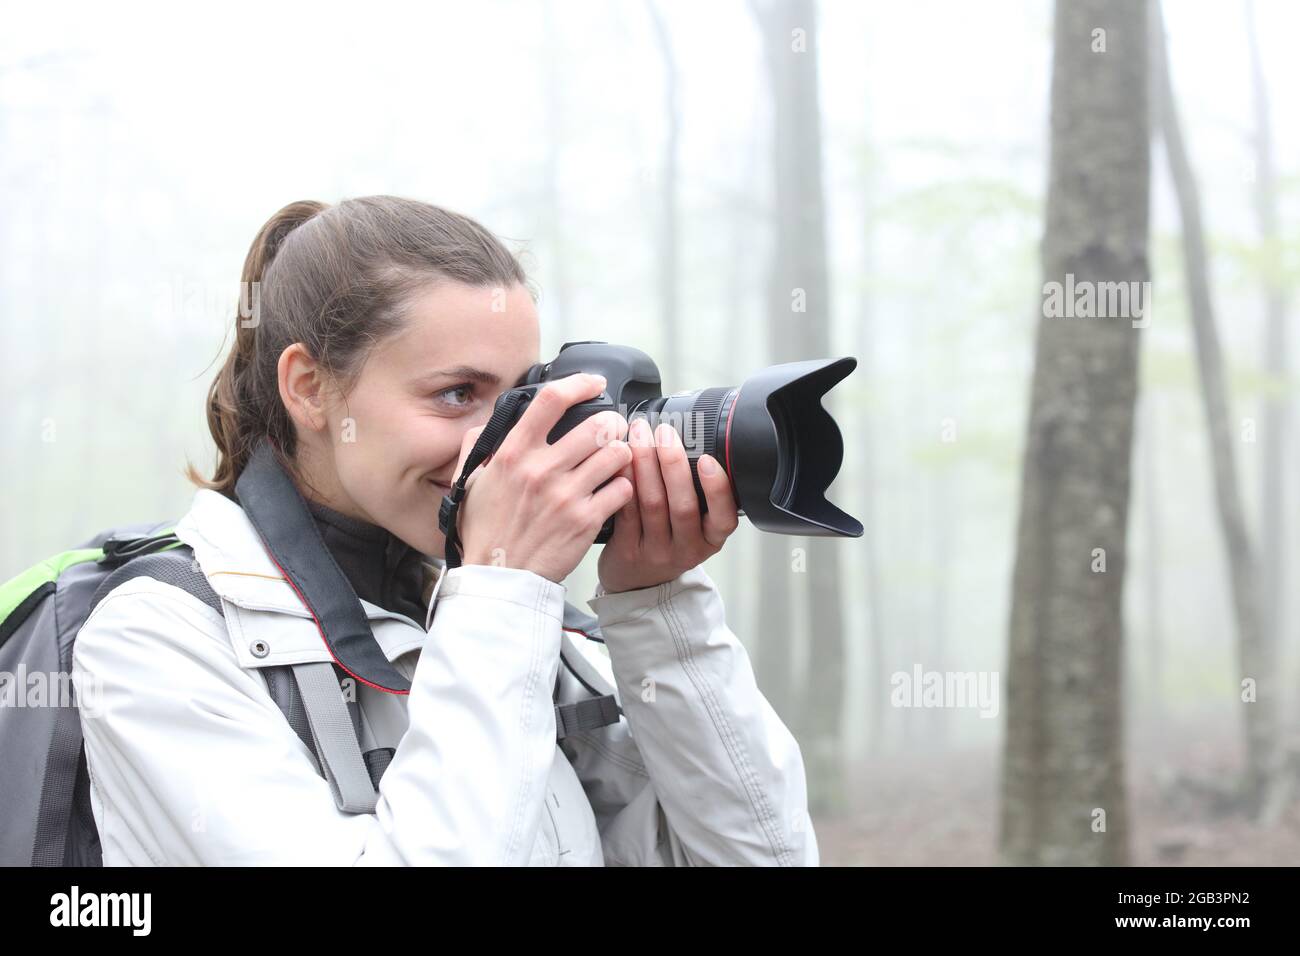 Trekker taking photos with dslr camera in a forest a foggy day Stock Photo